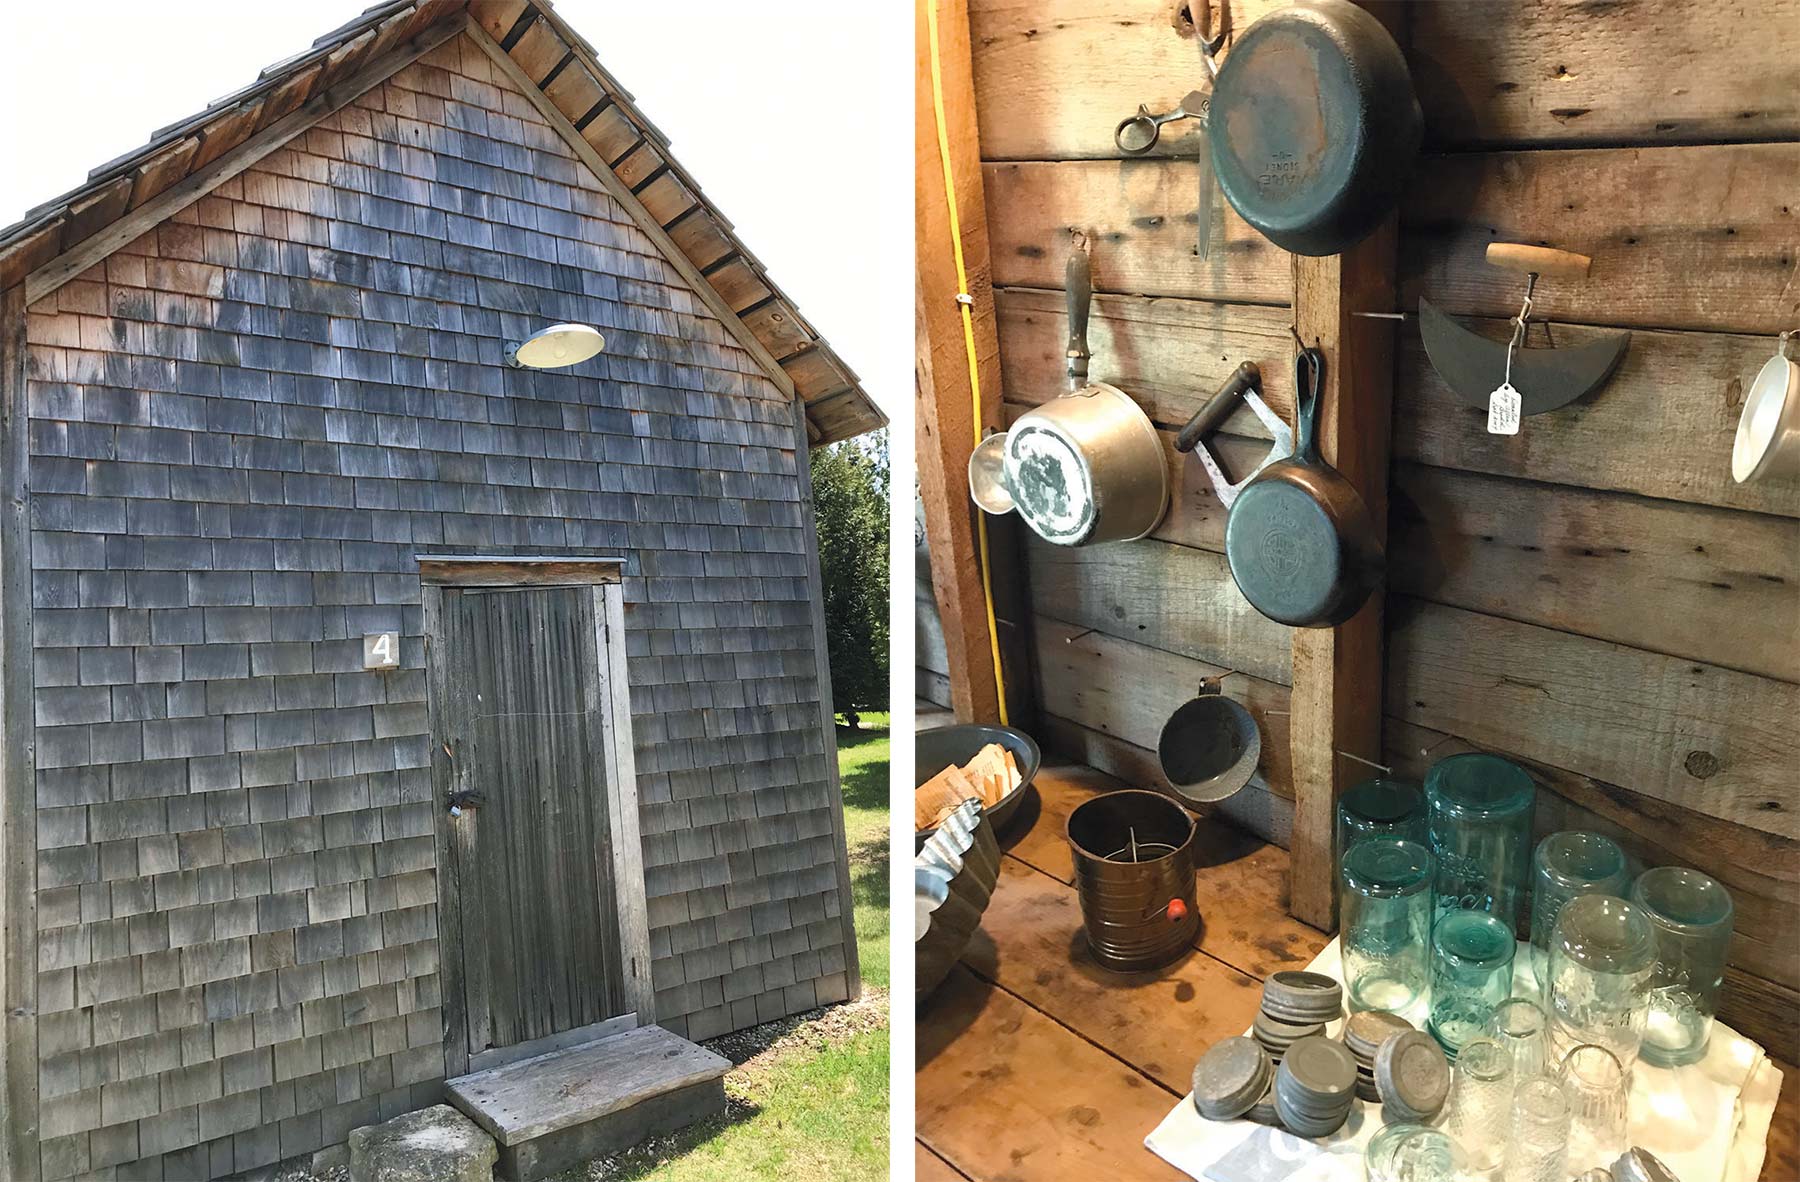 Interior and exterior views of the summer kitchen at the Corner of the Past Museum in Sister Bay.